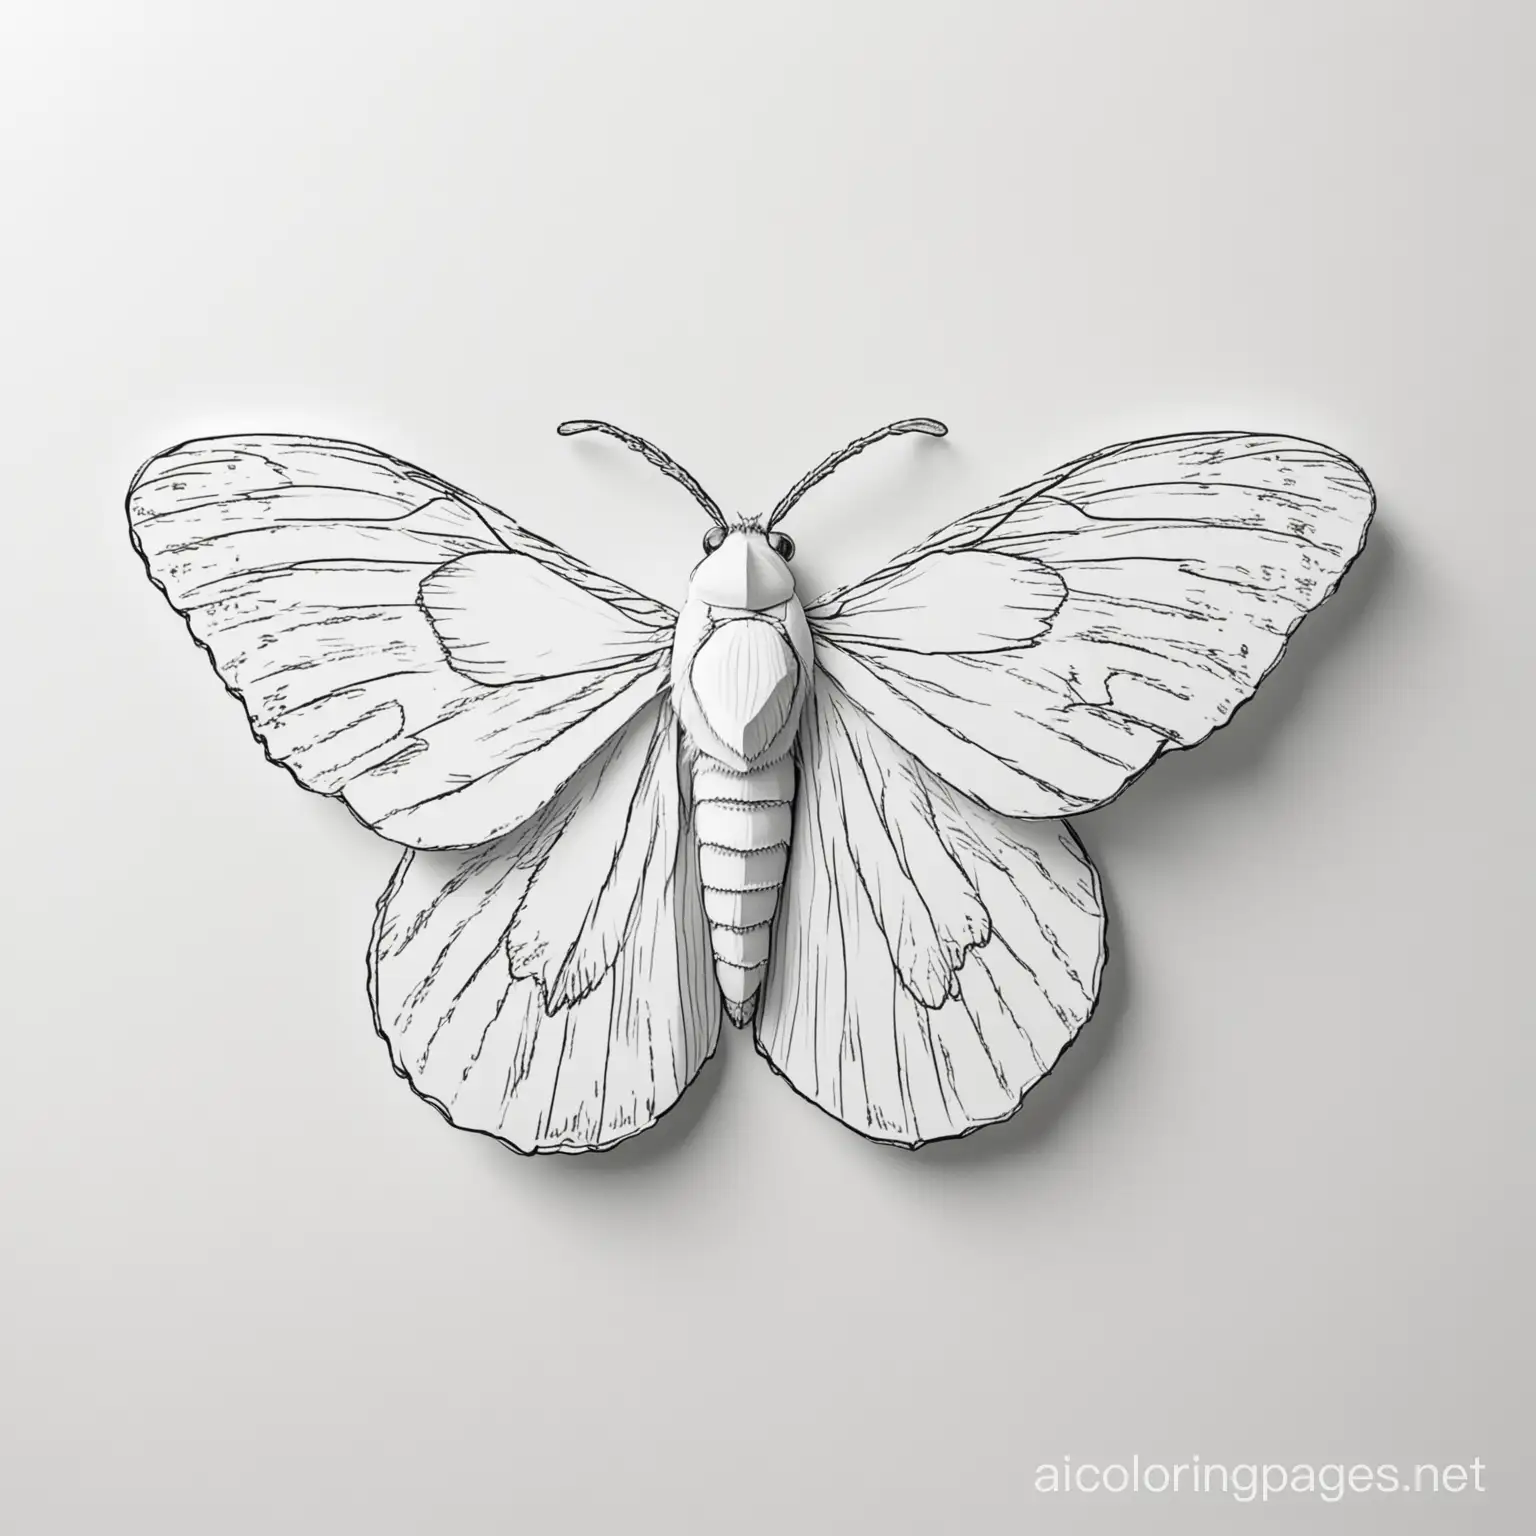 Monochrome-Moth-Coloring-Page-on-White-Background